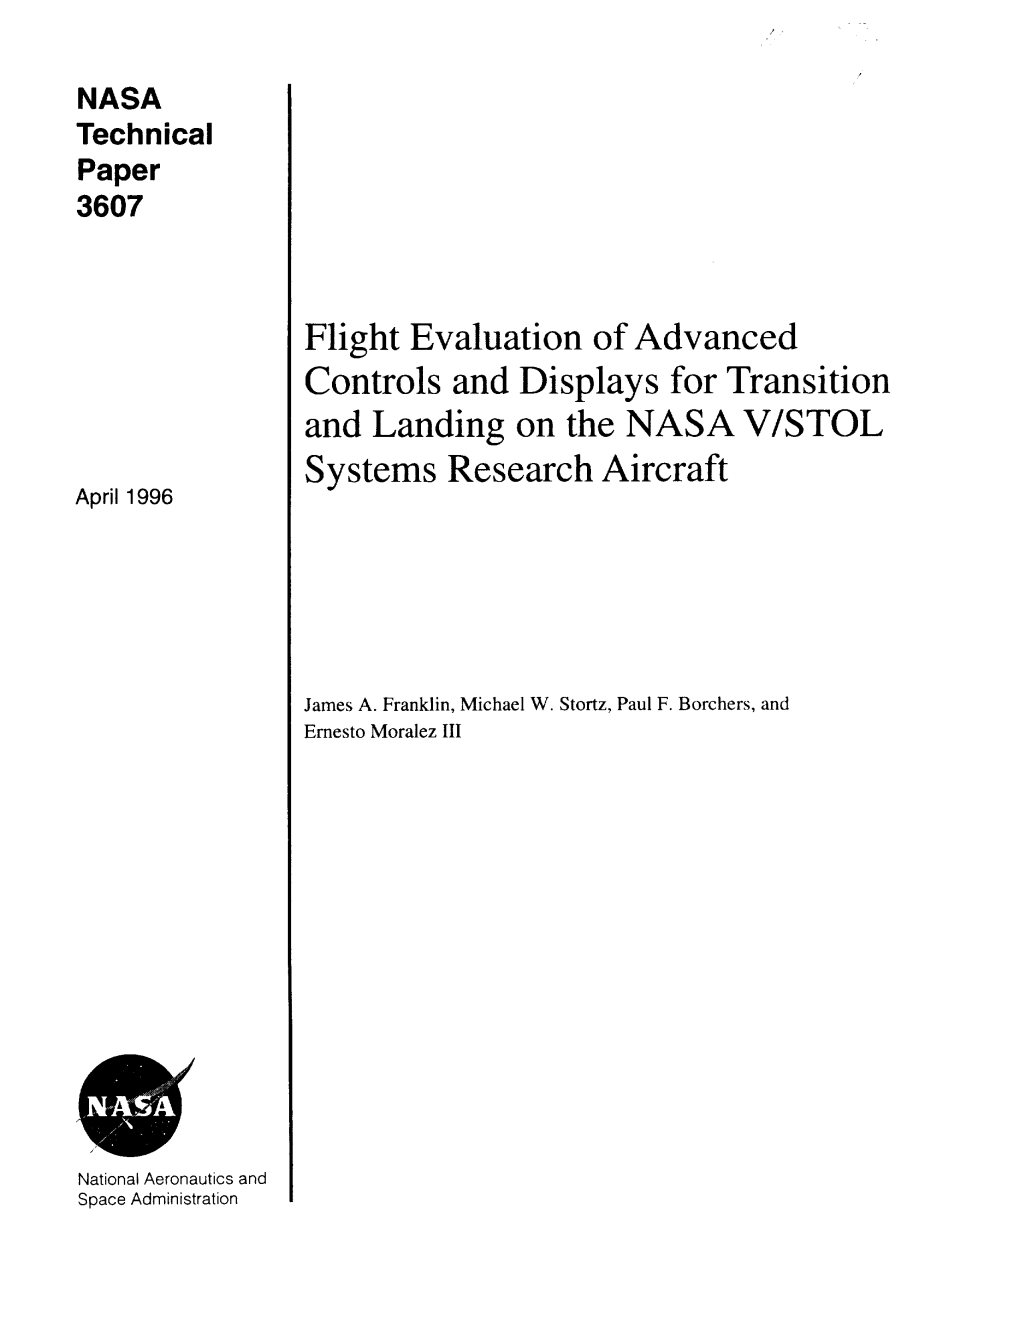 Flight Evaluation of Advanced Controls and Displays for Transition and Landing on the NASA V/STOL Systems Research Aircraft April 1996